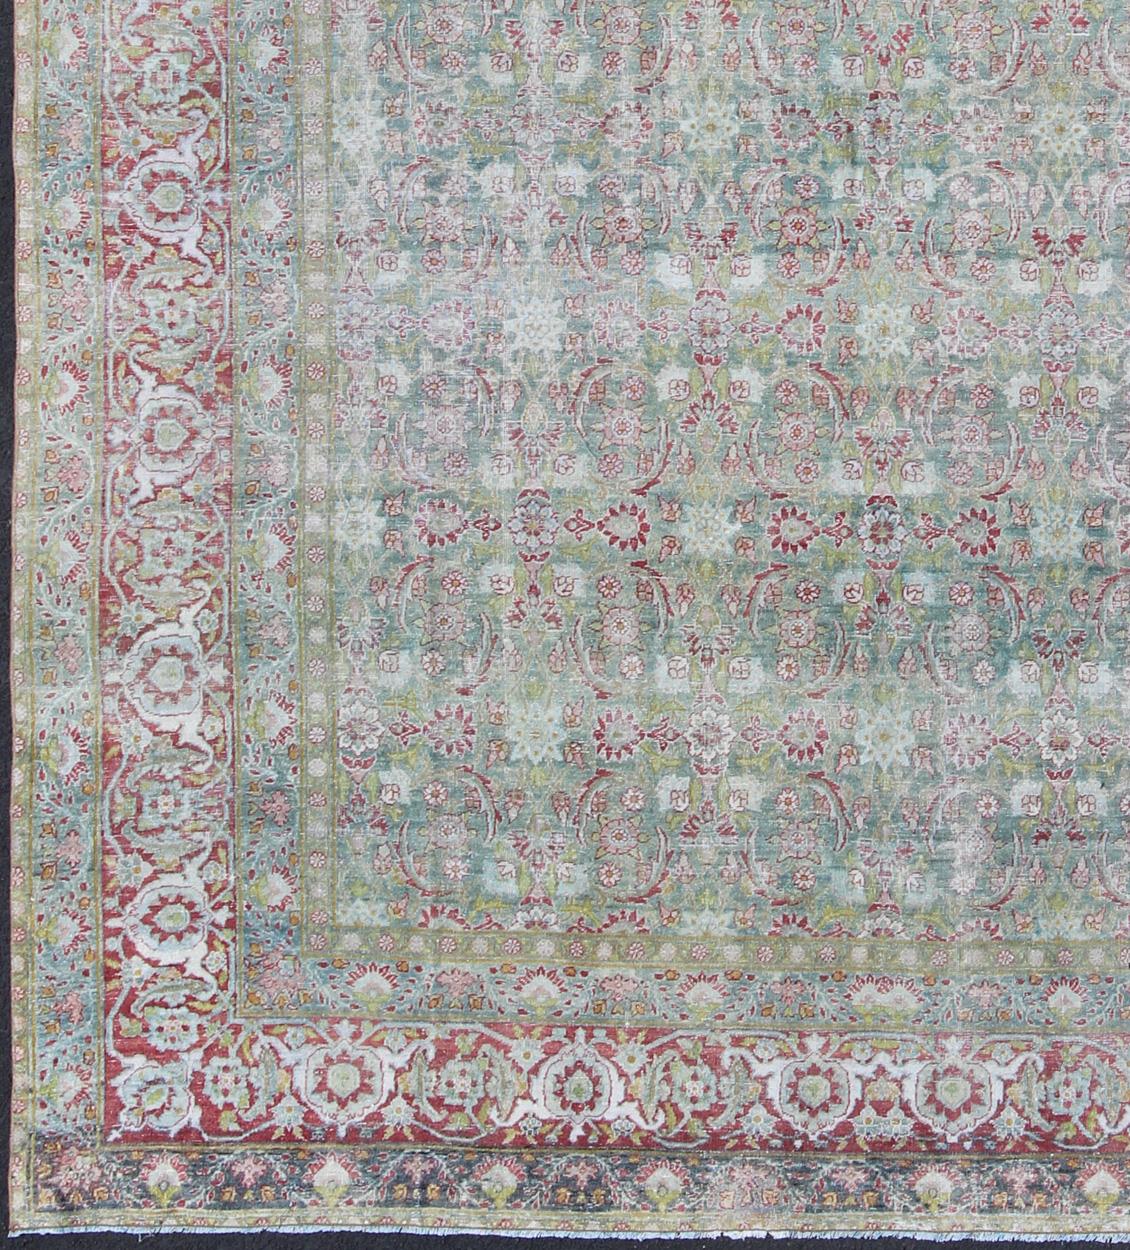 Antique Persian Kerman Lavar rug with geometric leaf and flower Herati motifs, Kwarugs E-0803, antique classic Persian Lavar Kerman

With a teal color backgrounds that varies from teal green to teal blue, this exquisite antique Lavar Kerman carpet